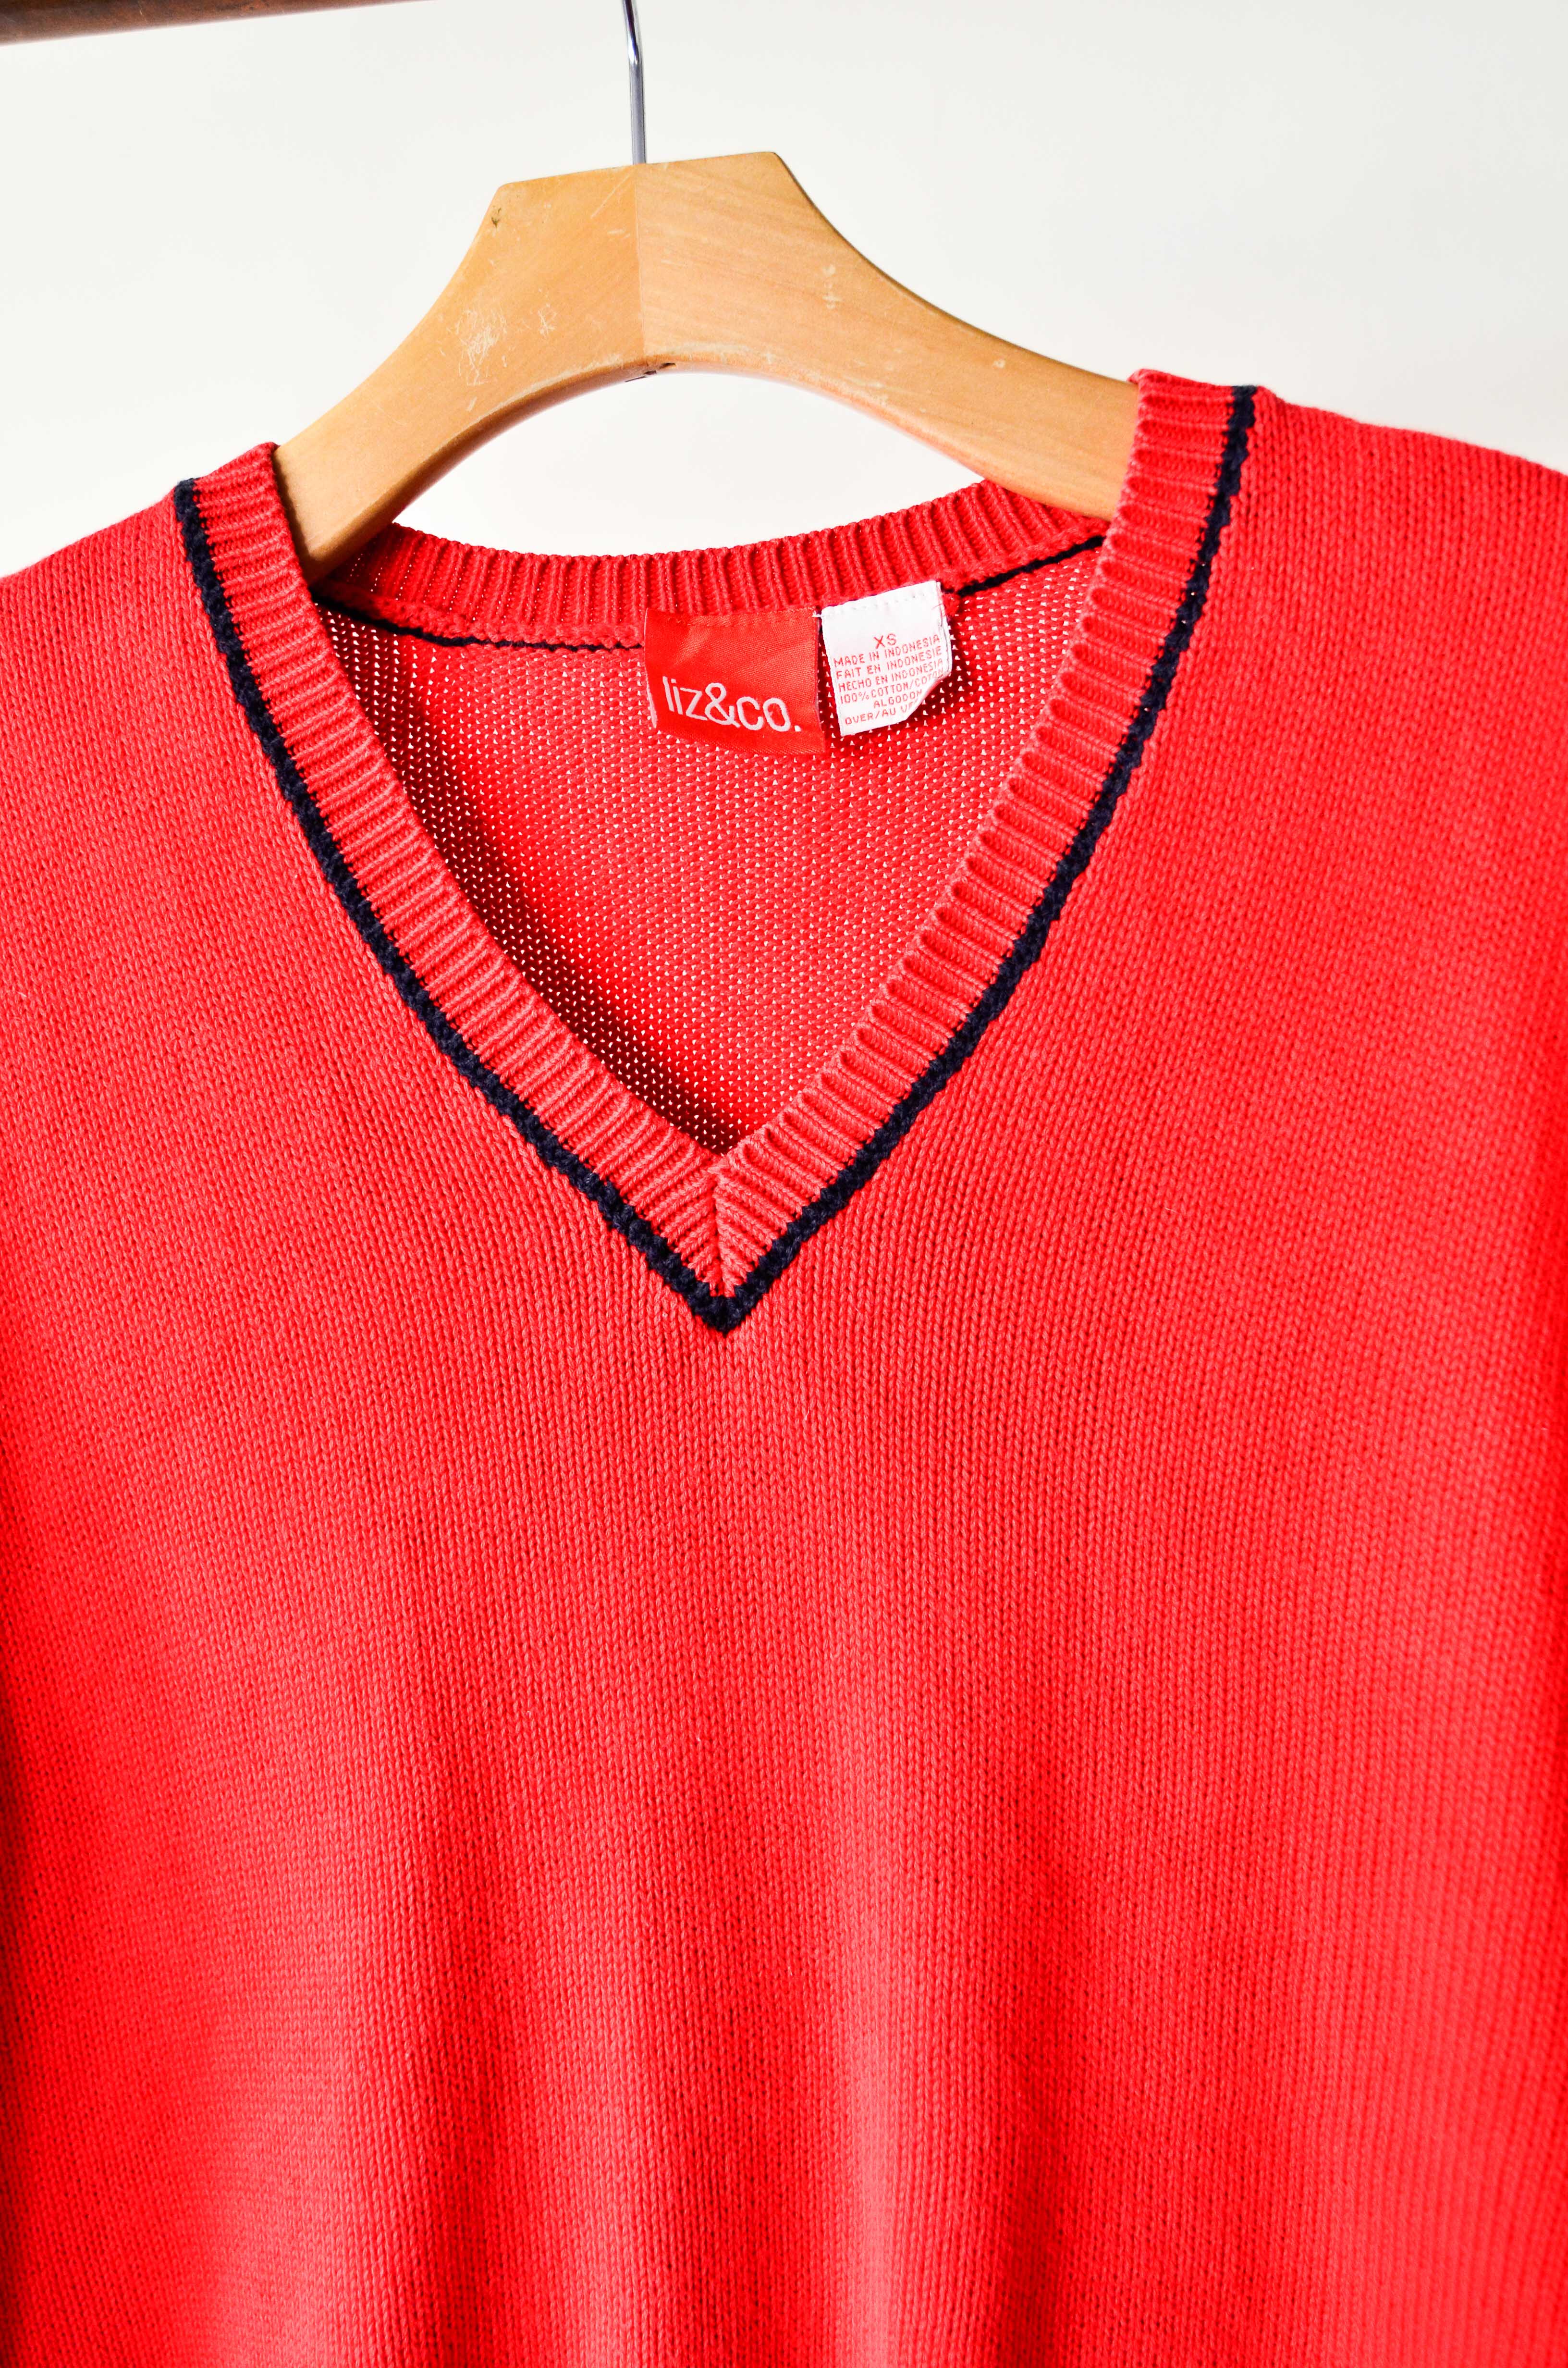 Sweater vintage red